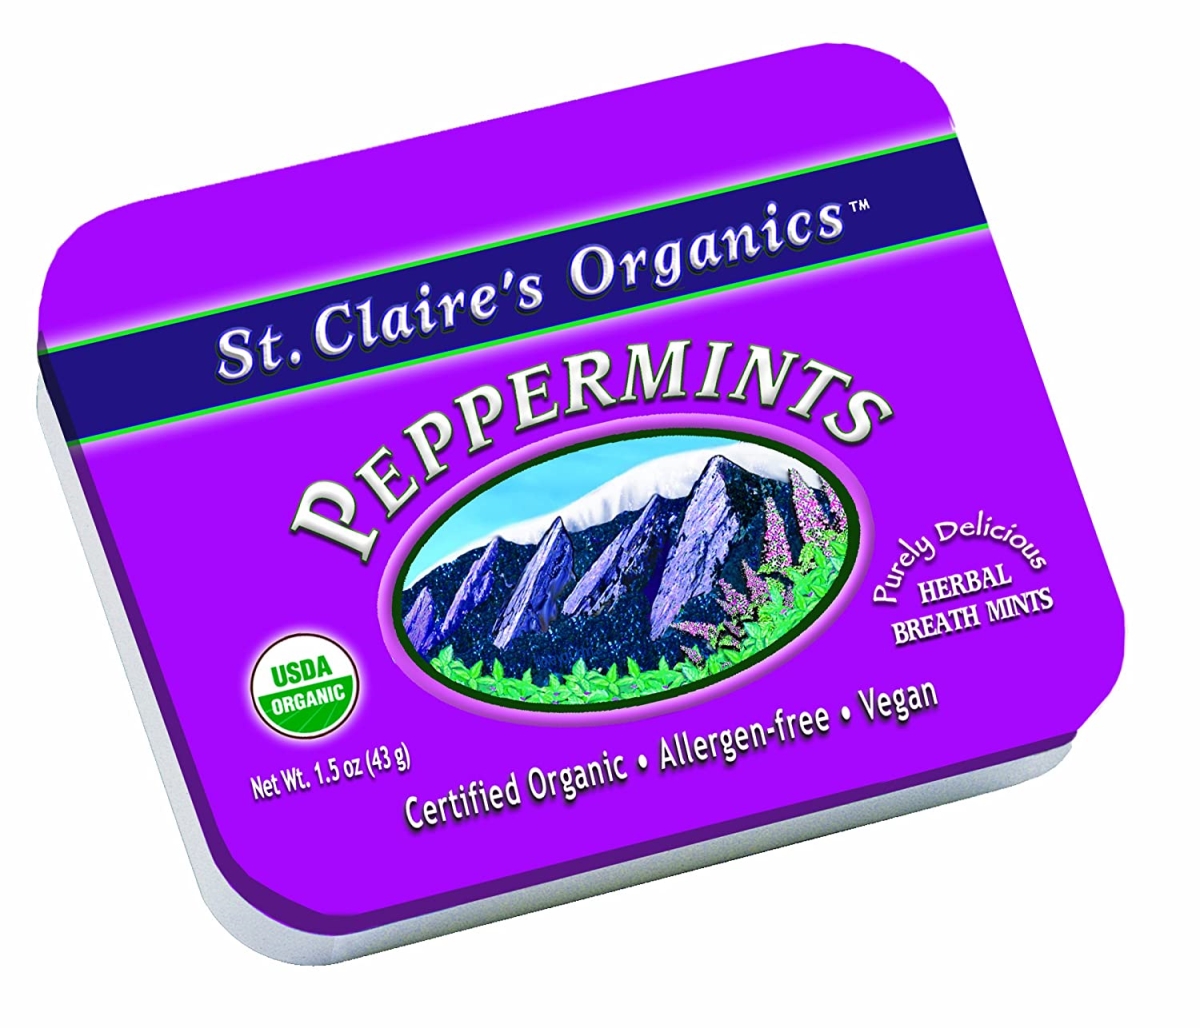 Picture of St Claires Organics 2568681 1.5 oz Controller Organic Peppermints Candy